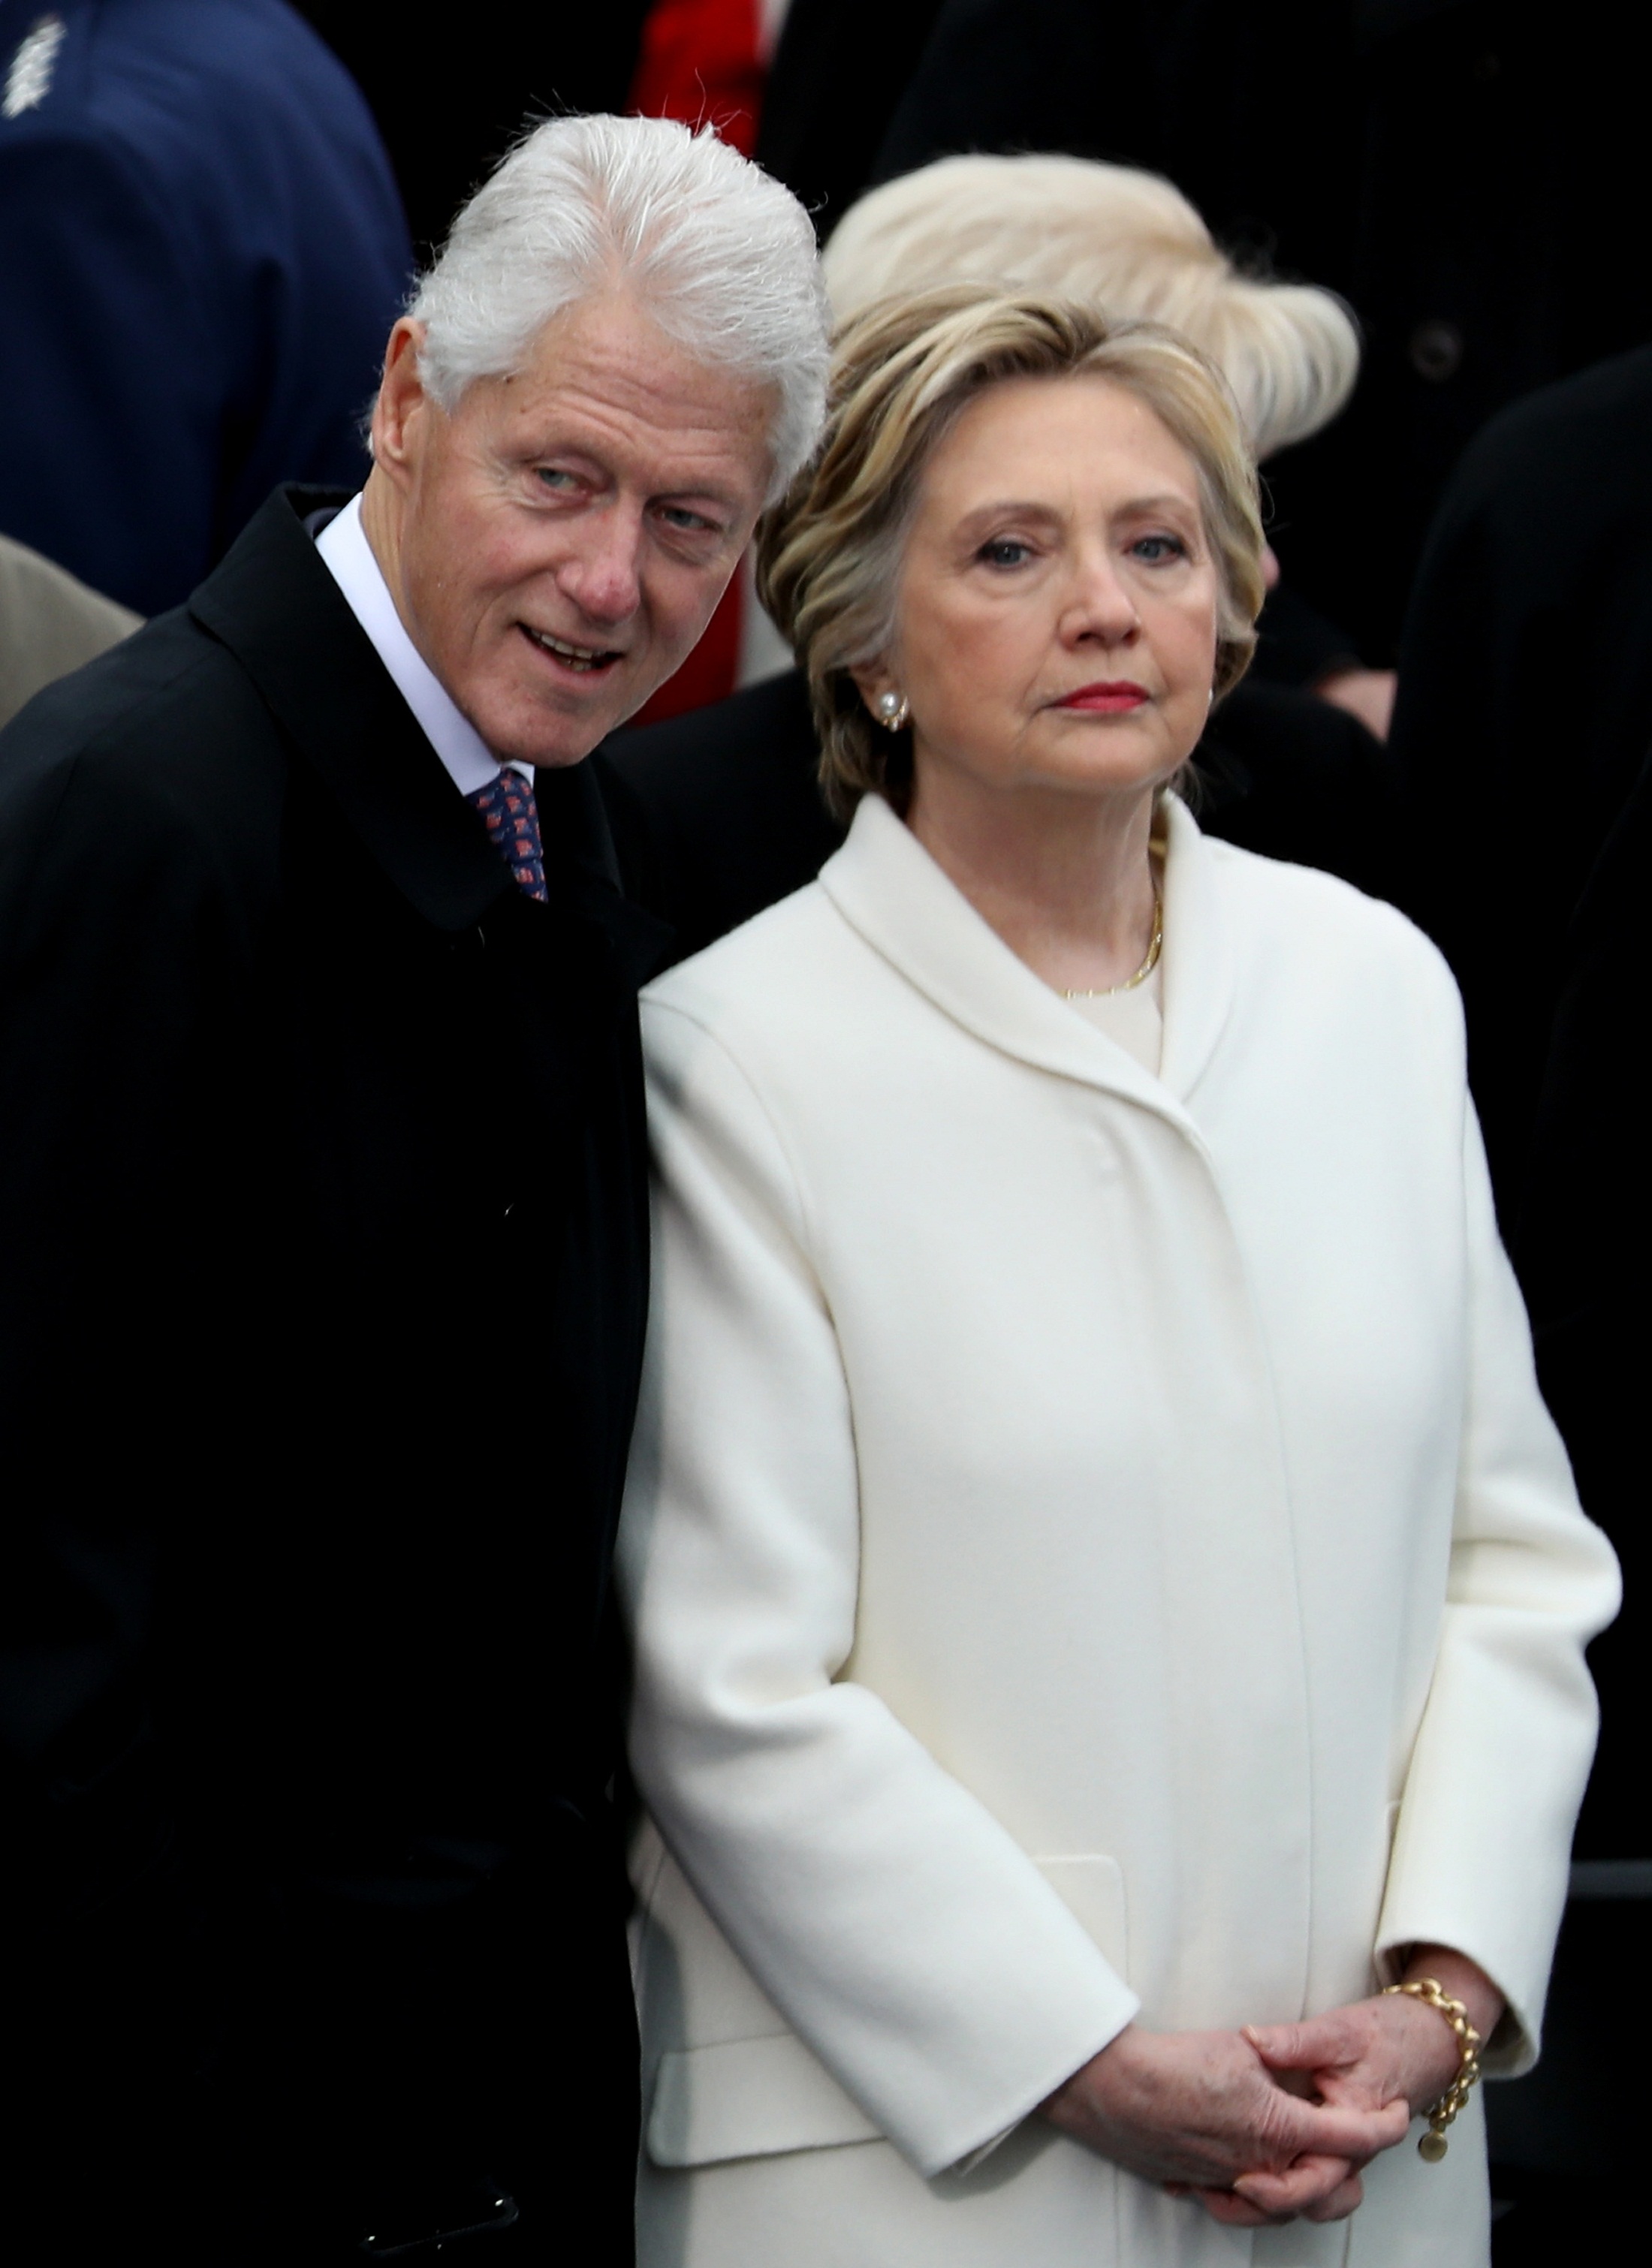 WASHINGTON, DC - JANUARY 20: Former President Bill Clinton and former Democratic presidential nominee Hillary Clinton stand on the West Front of the U.S. Capitol on January 20, 2017 in Washington, DC. In today's inauguration ceremony Donald J. Trump becomes the 45th president of the United States.   Joe Raedle/Getty Images/AFP